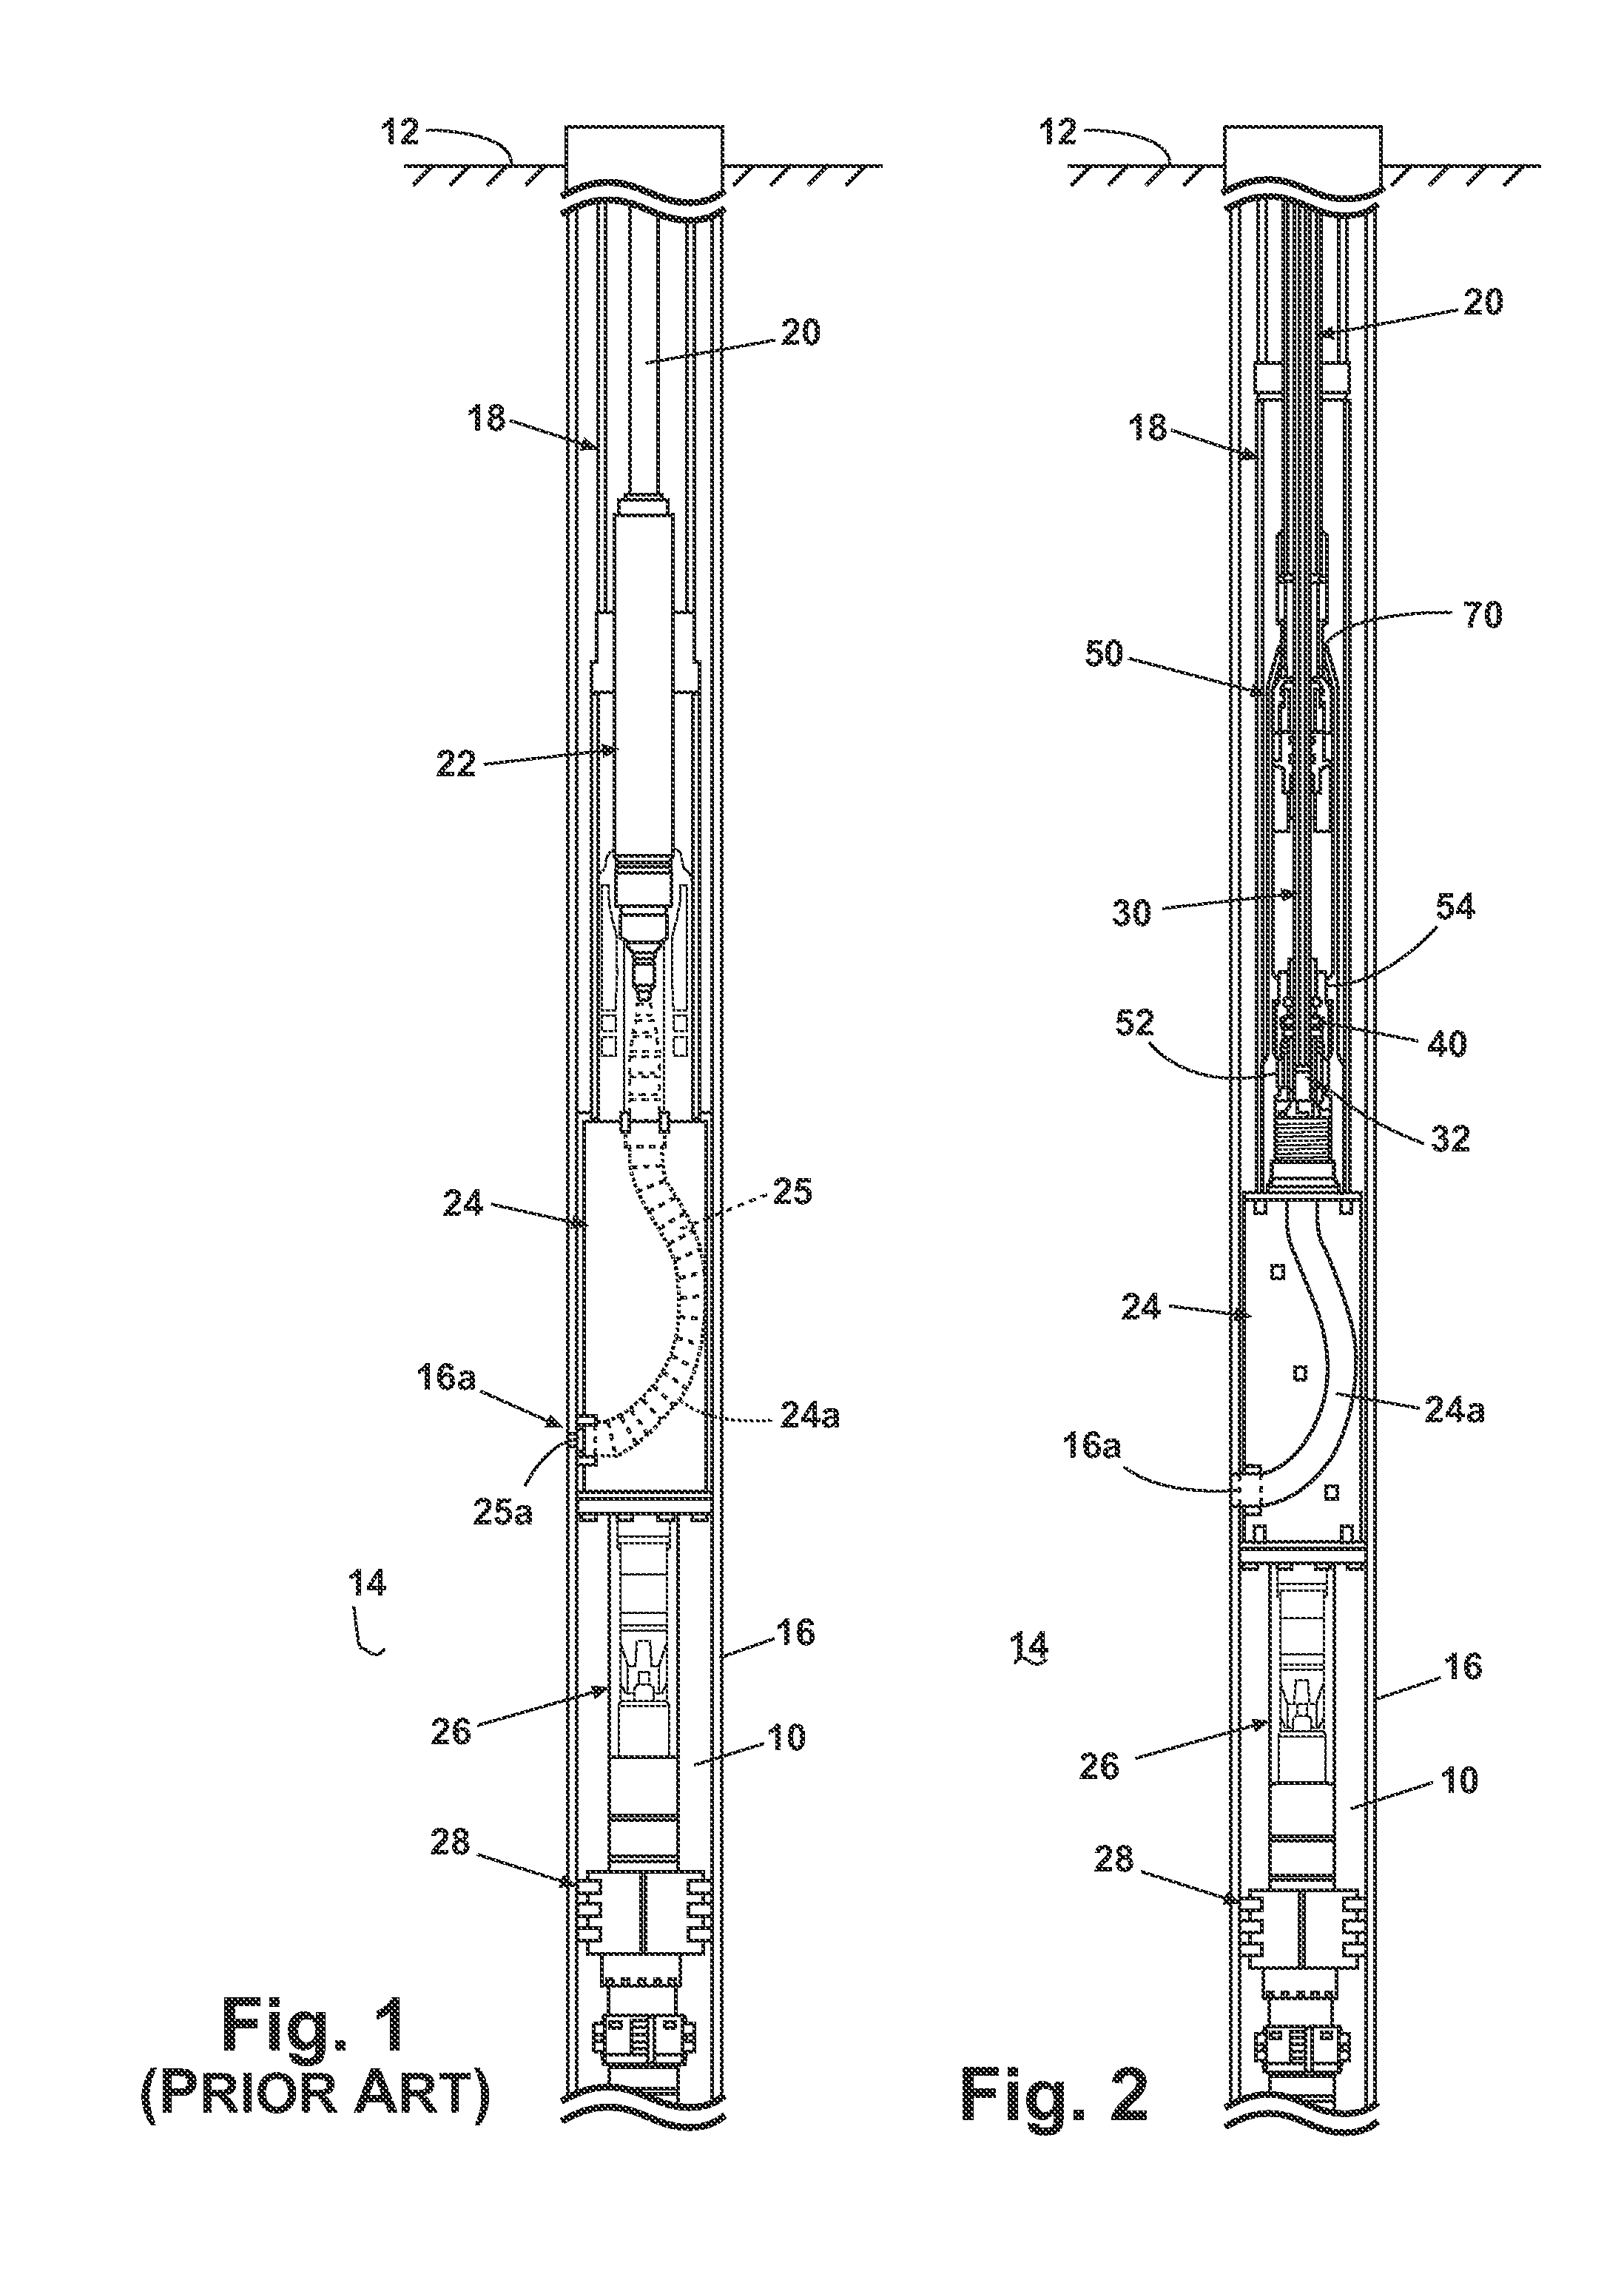 Apparatus and method for conveyance and control of a high pressure hose in jet drilling operations